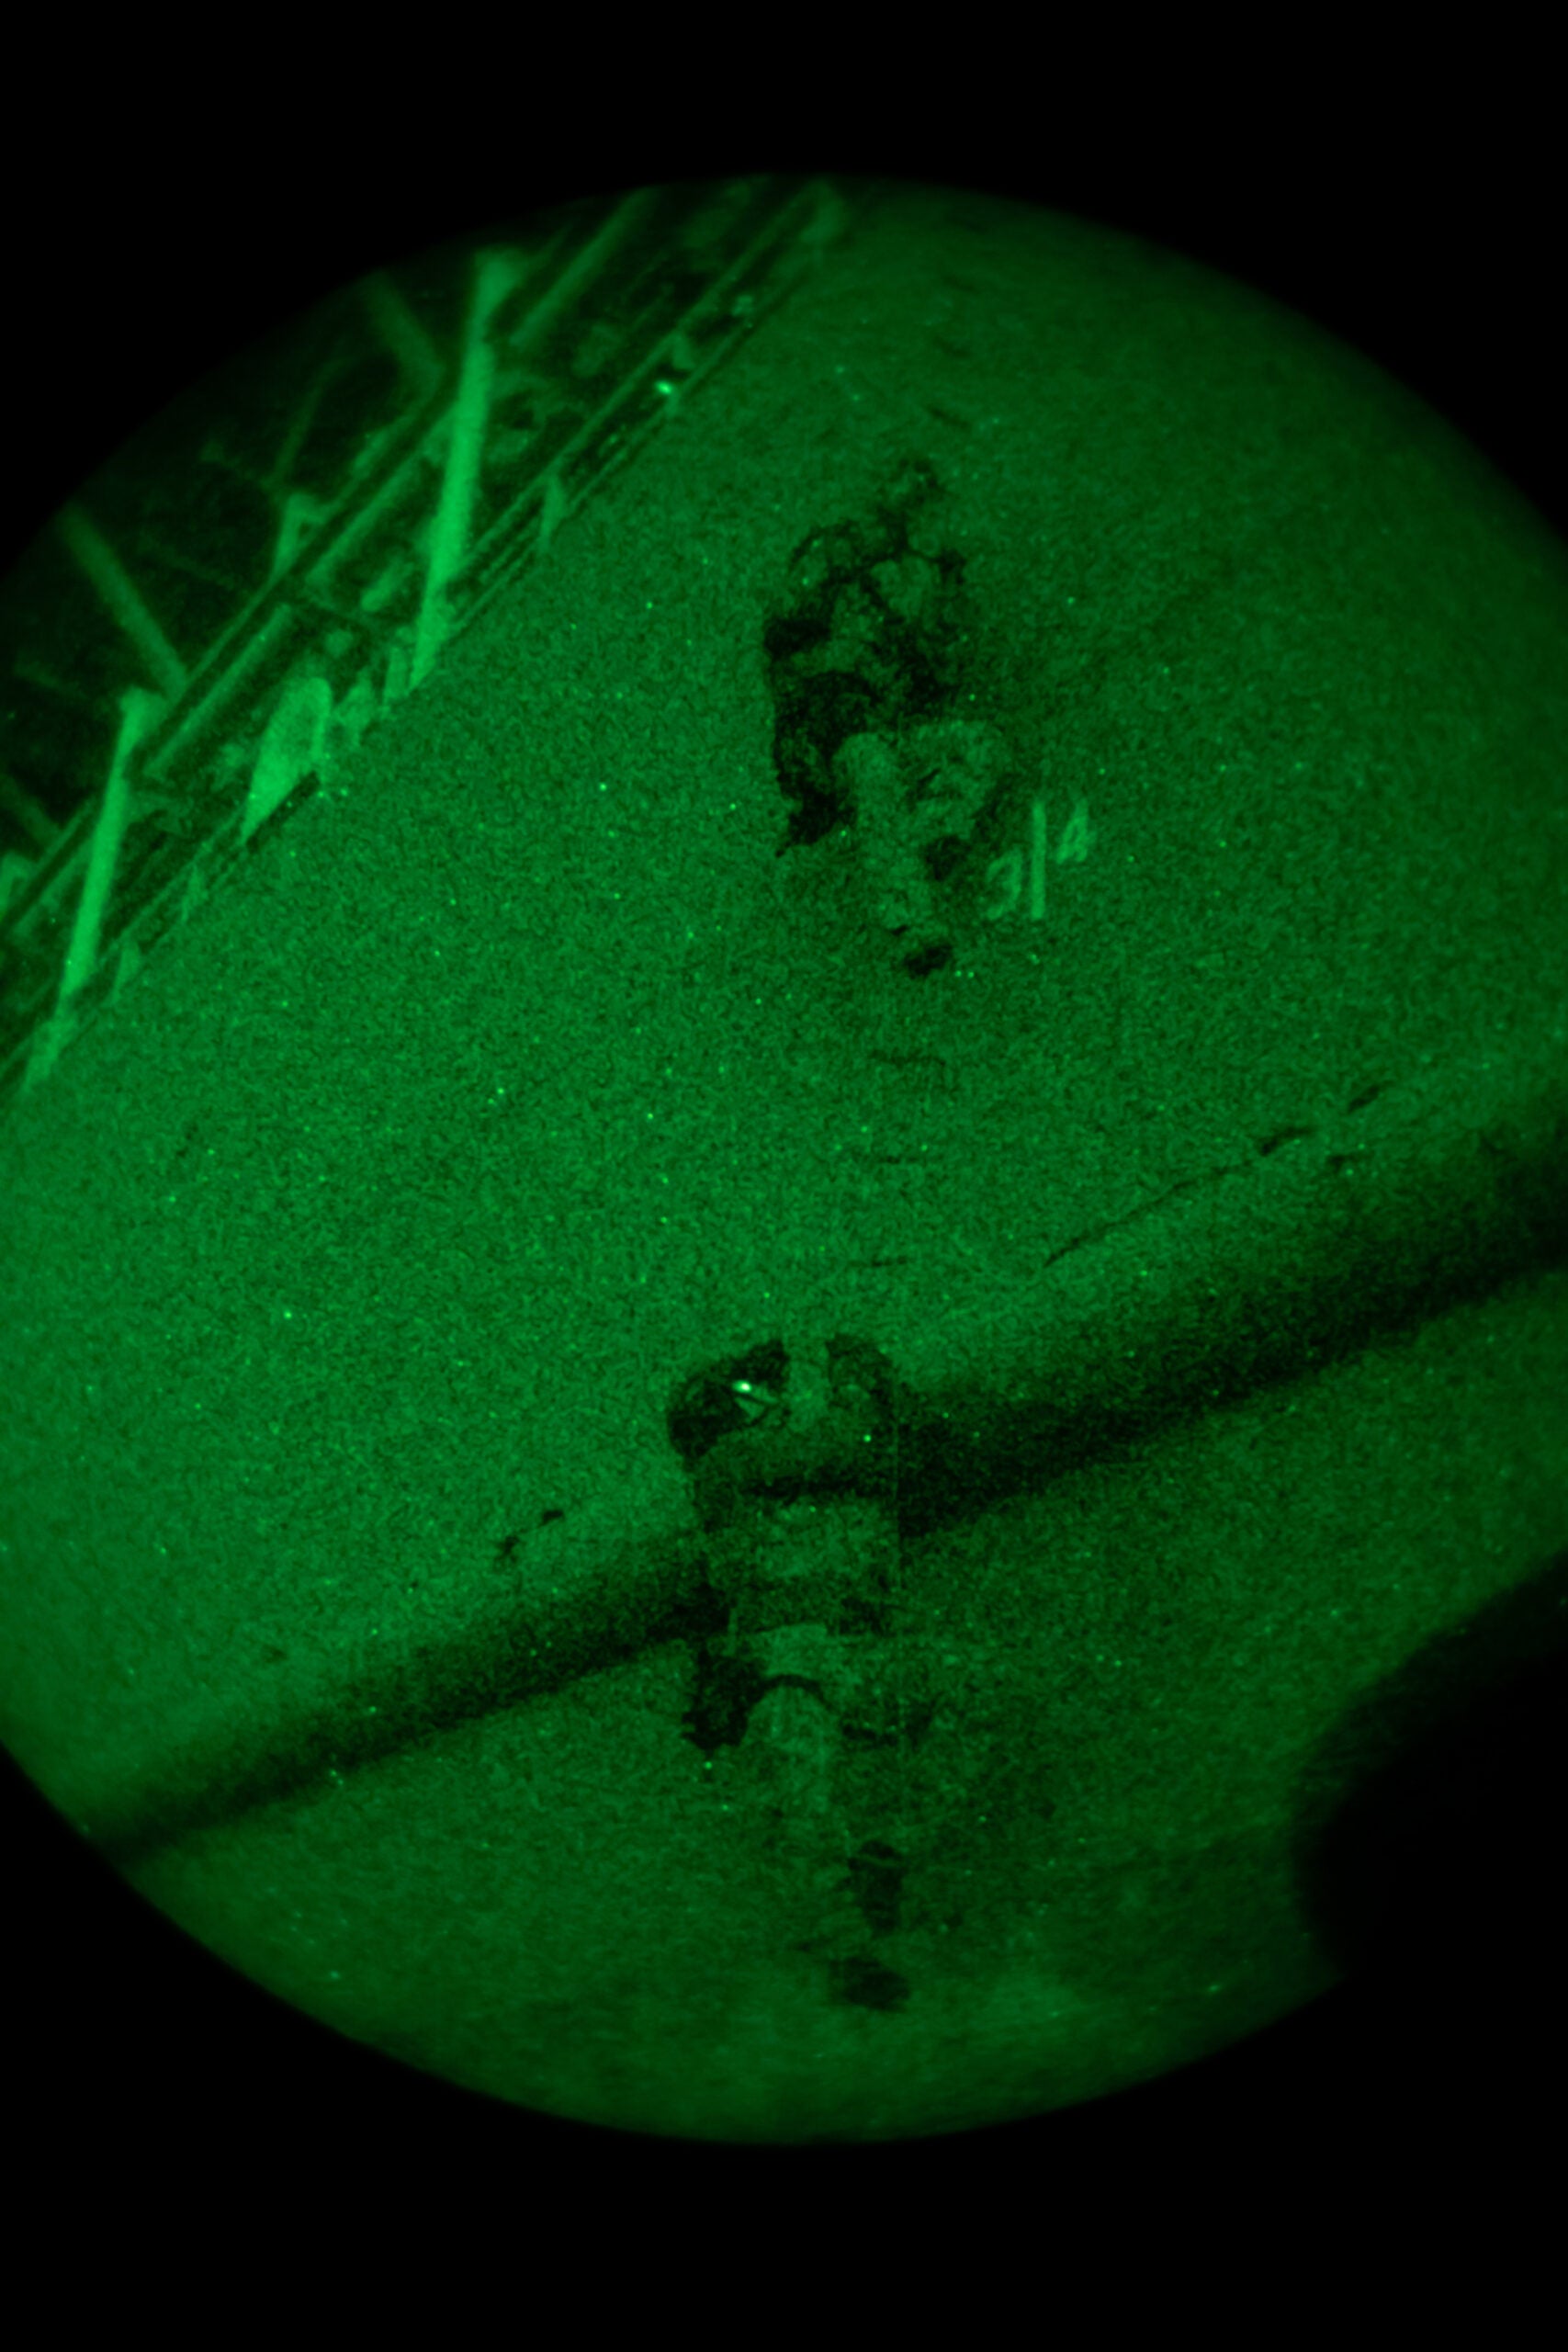 As part of Exercise Orion, Greek Special Operations Forces (SOF) members assigned to Z’ Moira Amfivion Katadromon (ZMAK) and U.S. Navy SEALs from Naval Special Warfare Group 2 climb a ladder to conduct visit, board, search, and seizure procedures during night operations on board an oil drill ship in the Gulf of Elefsina, Greece, April 6, 2022. Exercise Orion reinforces Greece as a regional SOF leader, enhances interoperability across multiple domains, and strengthens relationships with NATO and non-NATO partners. The exercise focuses on highlighting operational capabilities, international collaborations and conventional and hybrid warfare training. (U.S. Army photo by Sgt. Hannah Hawkins)